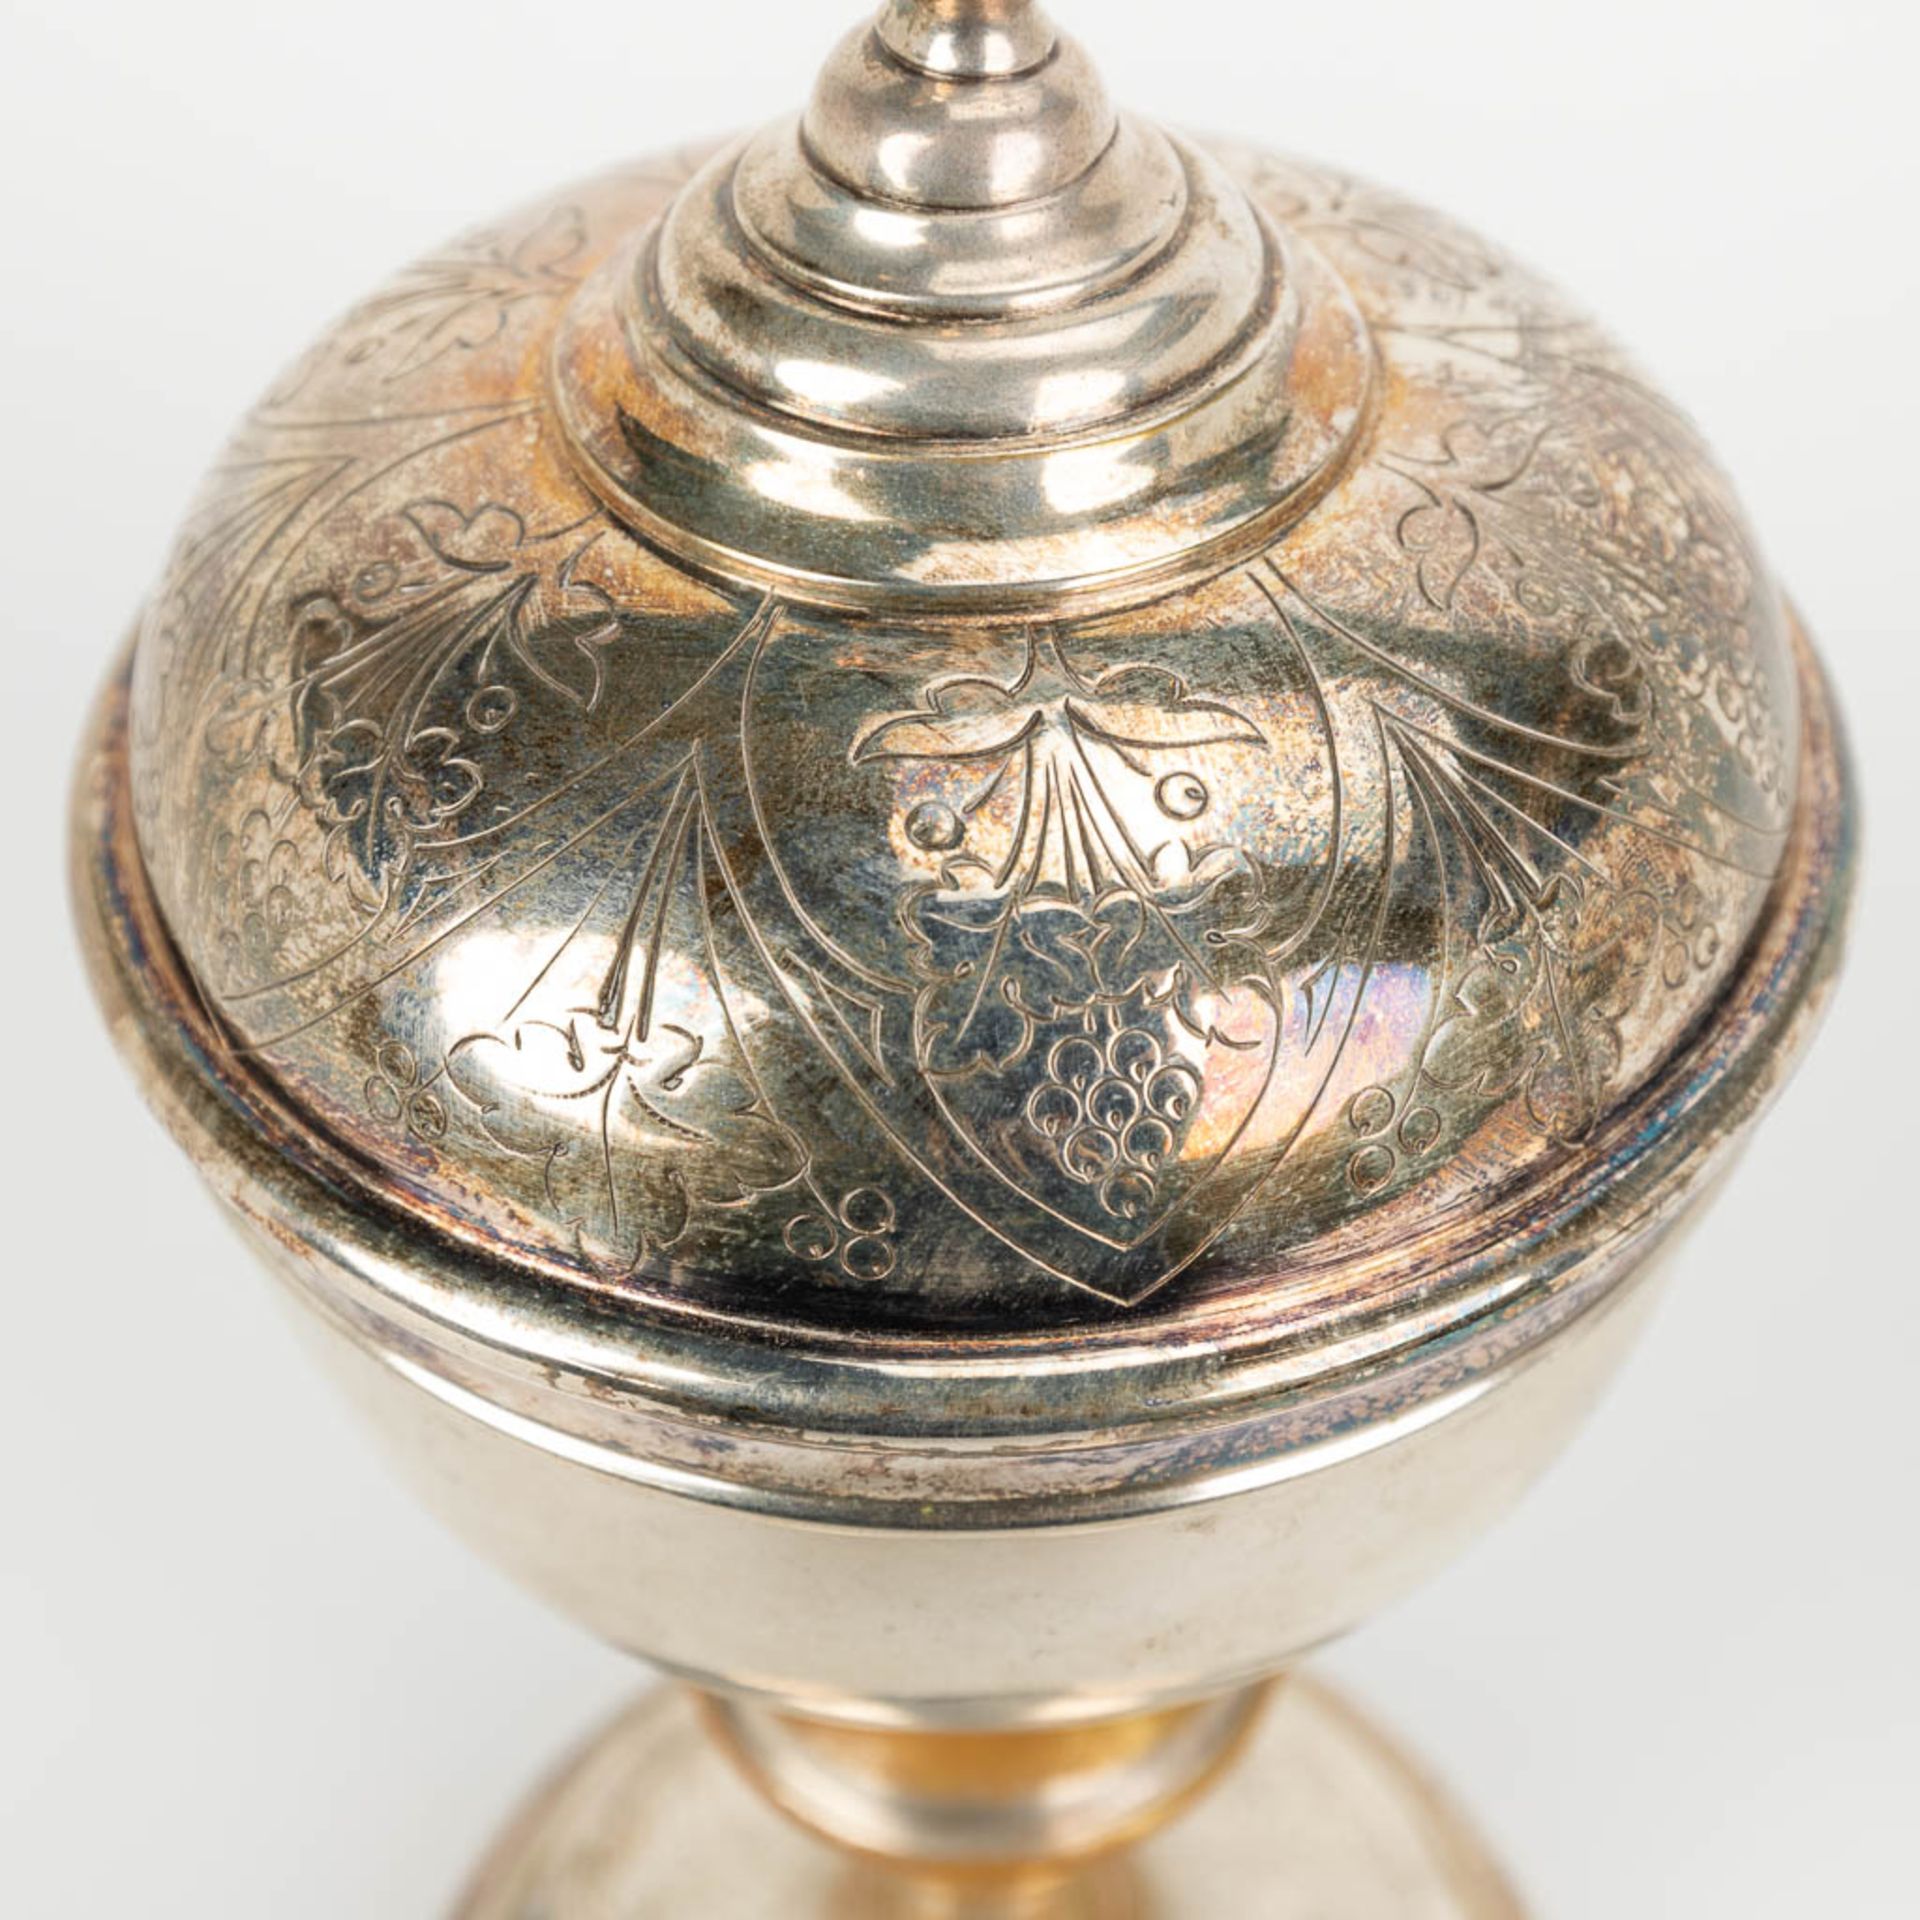 A collection of 2 silver-plated ciboria, gothic revival. (H:28cm) - Image 12 of 13